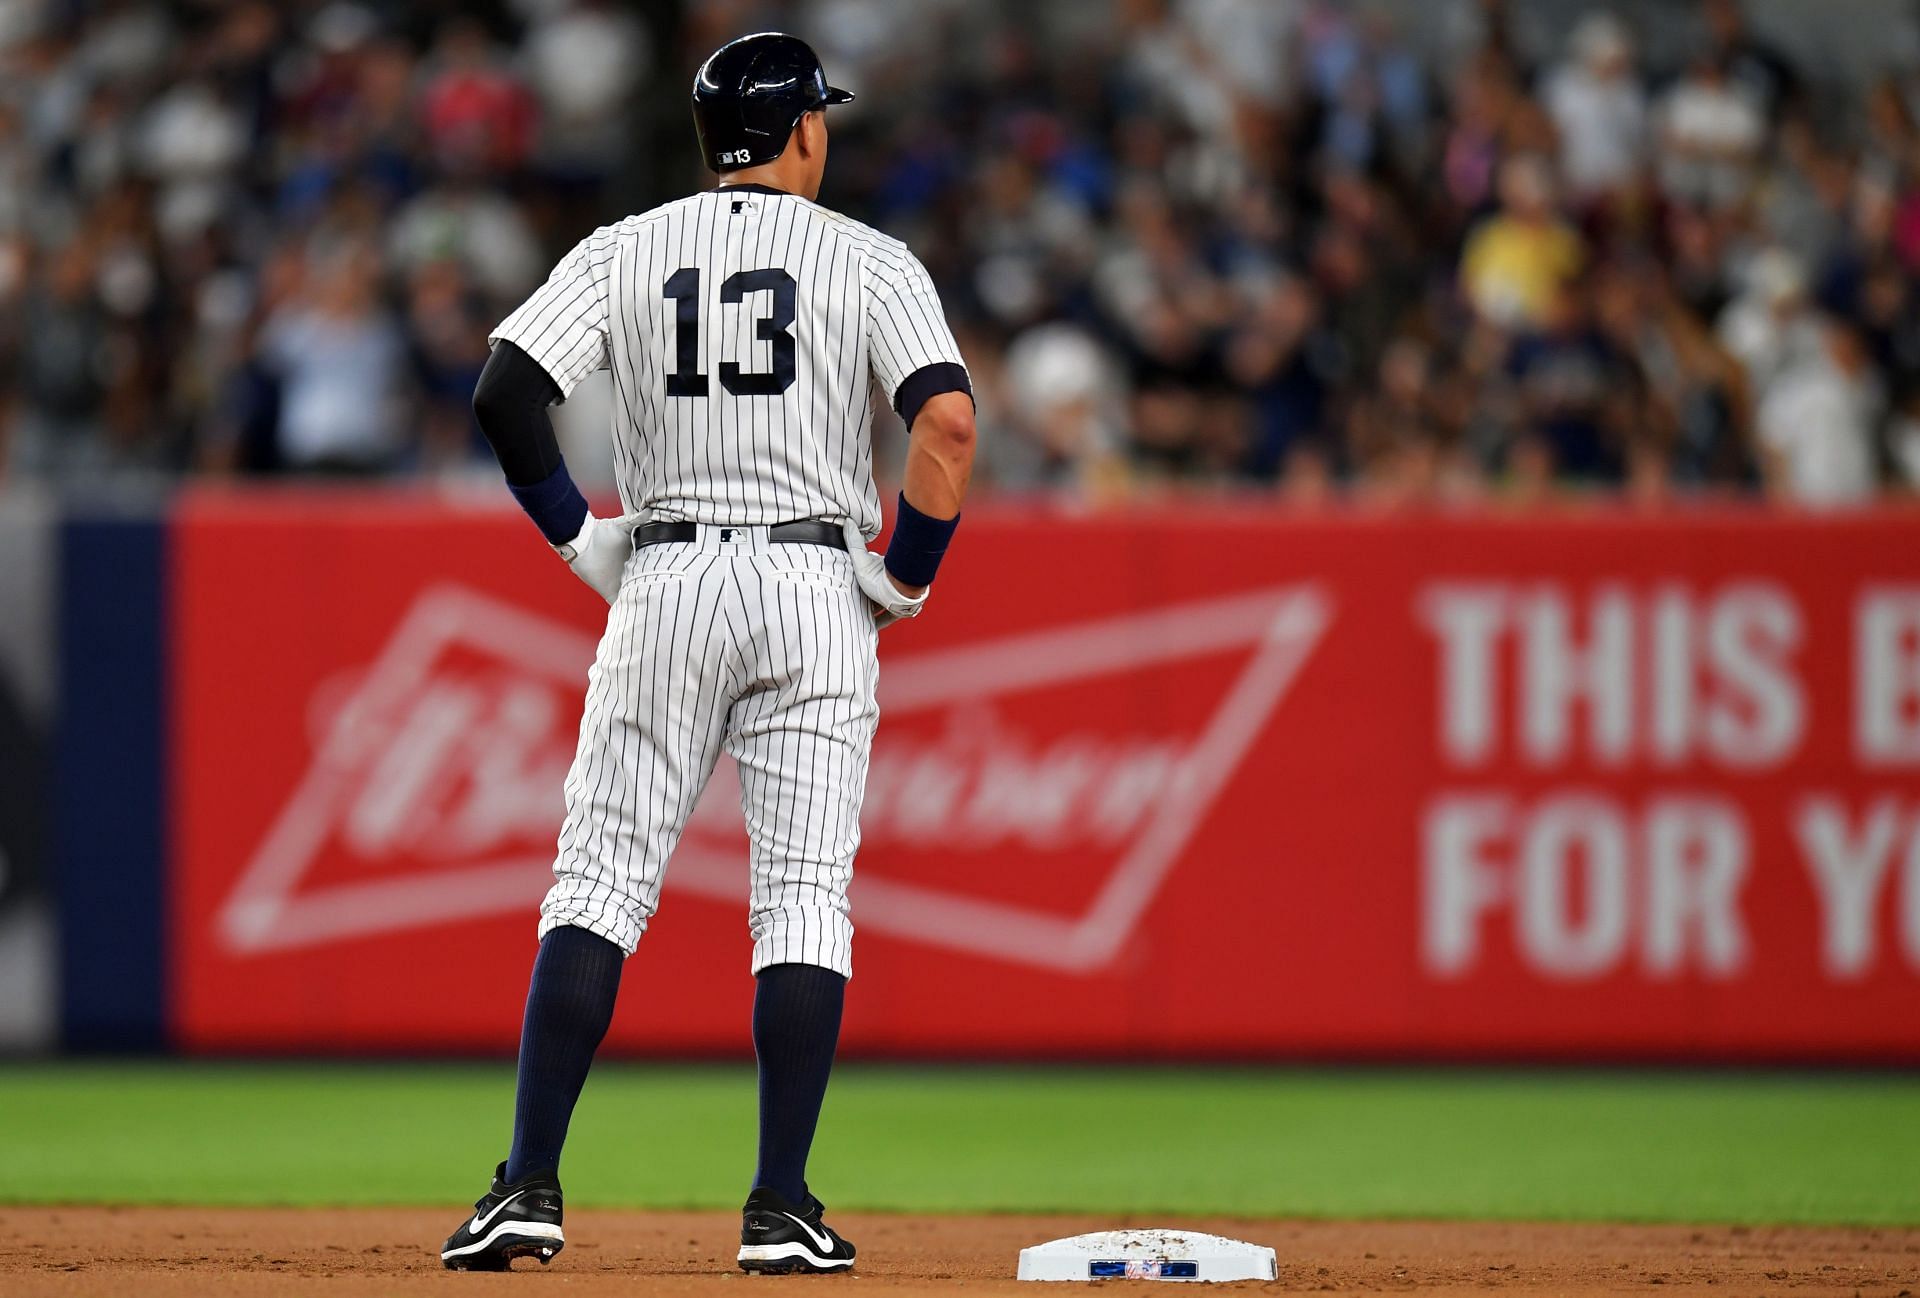 Former New York Yankees superstar Alex Rodriguez stole 329 bases and hit 696 home runs